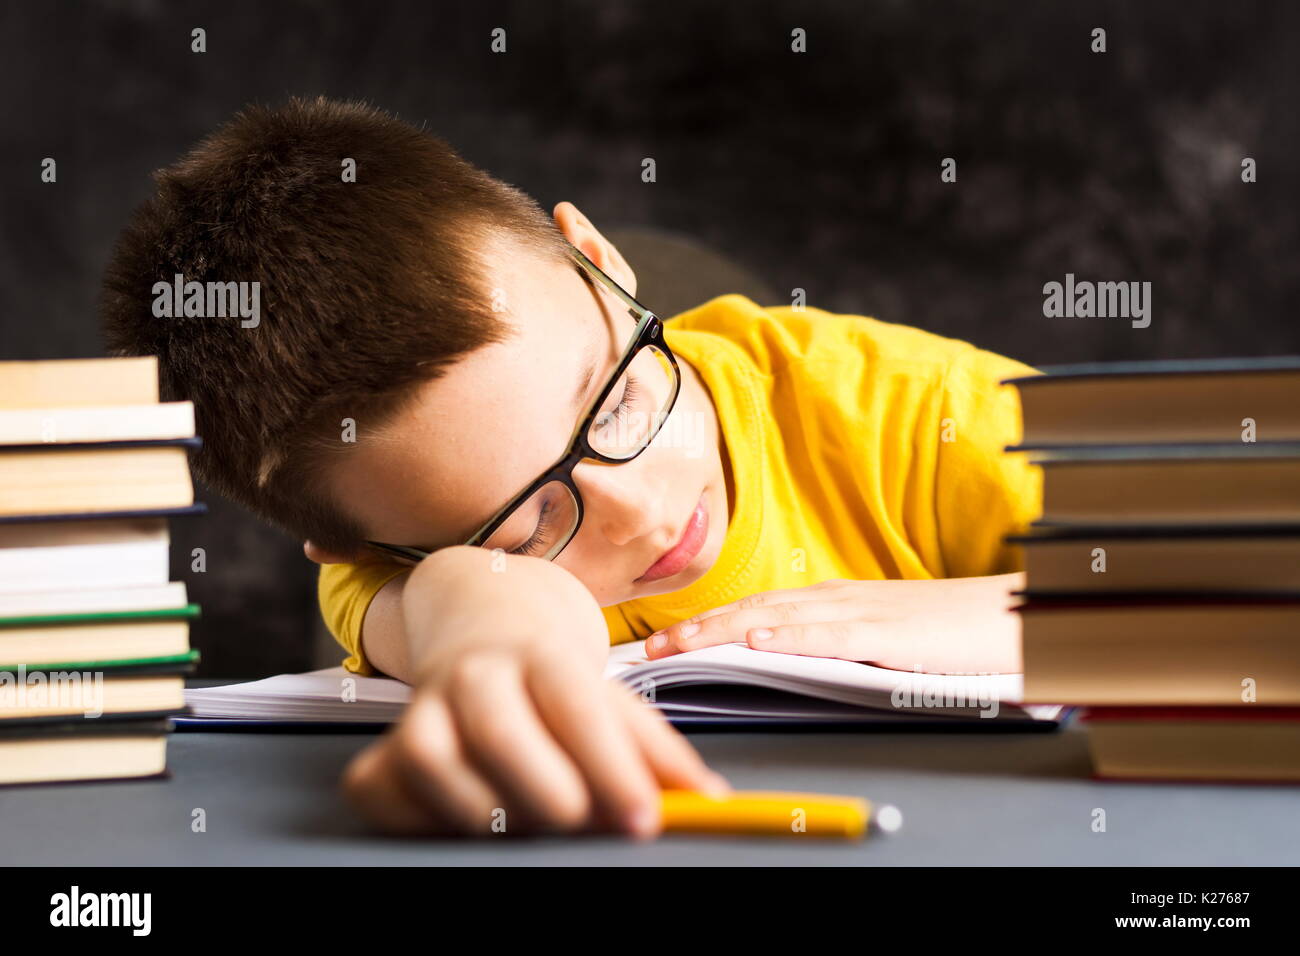 Boy taking a nap while finishing homework by the desk Stock Photo